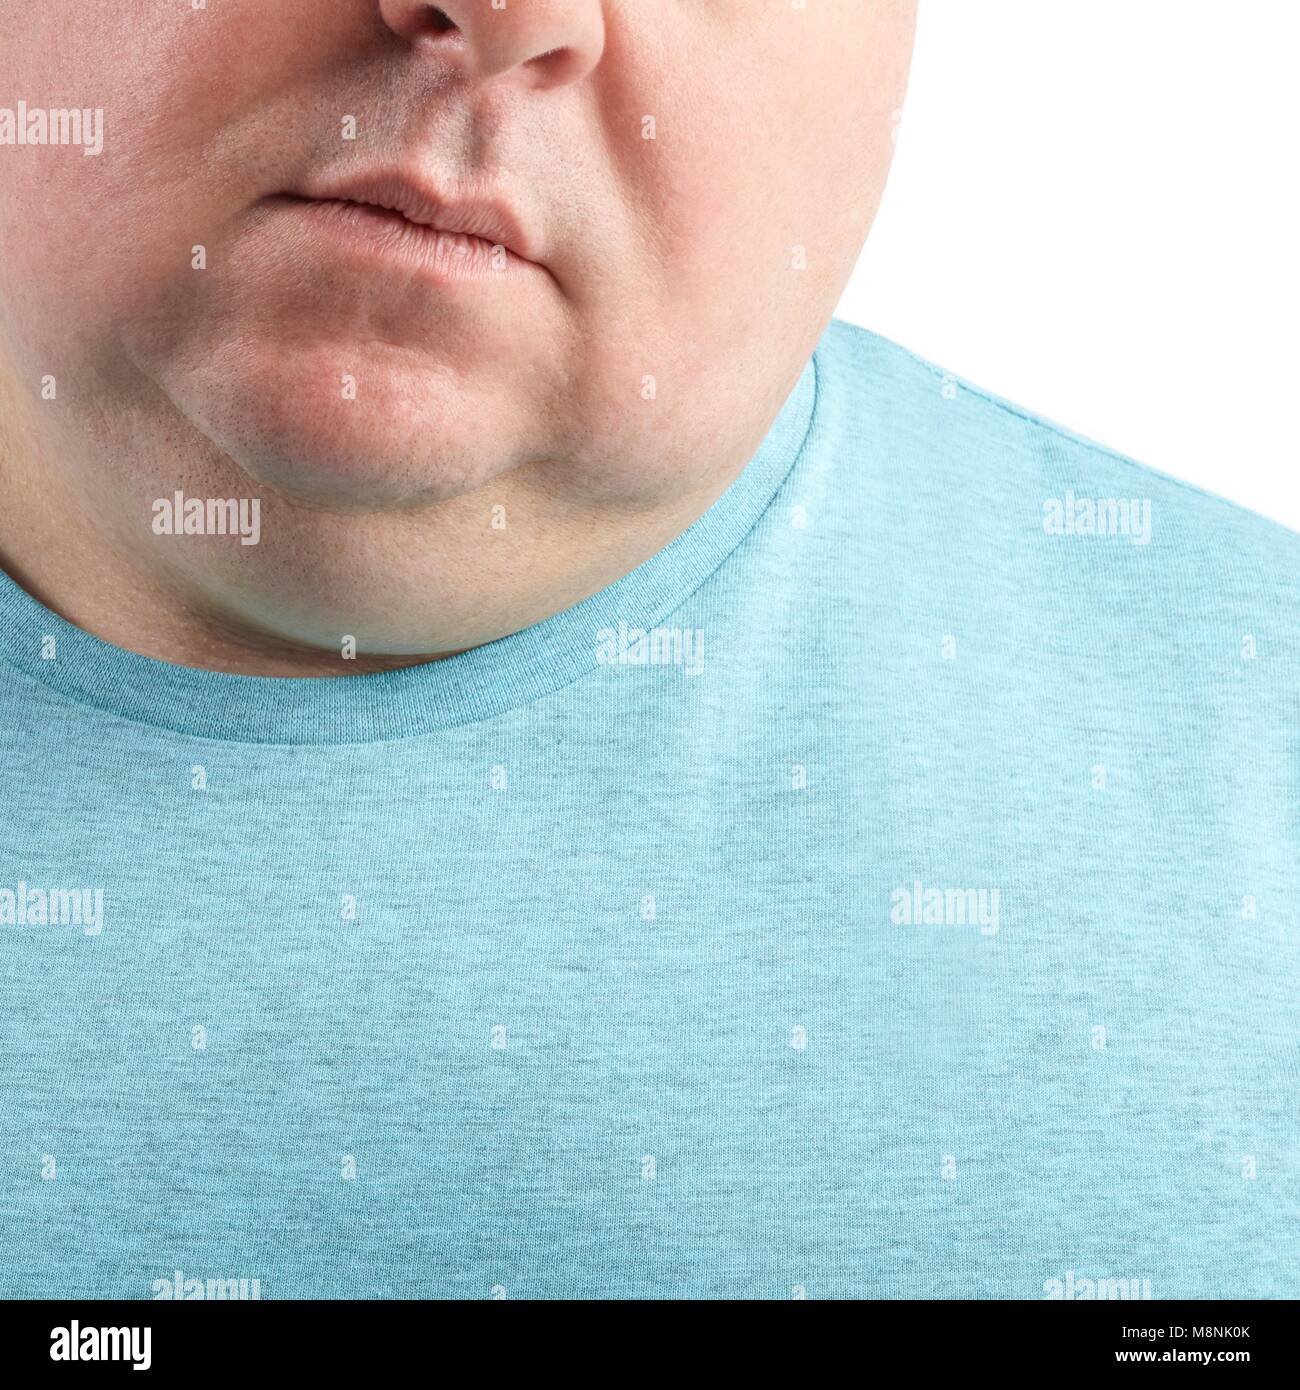 Close up of overweight man's chin and neck, cropped. Stock Photo